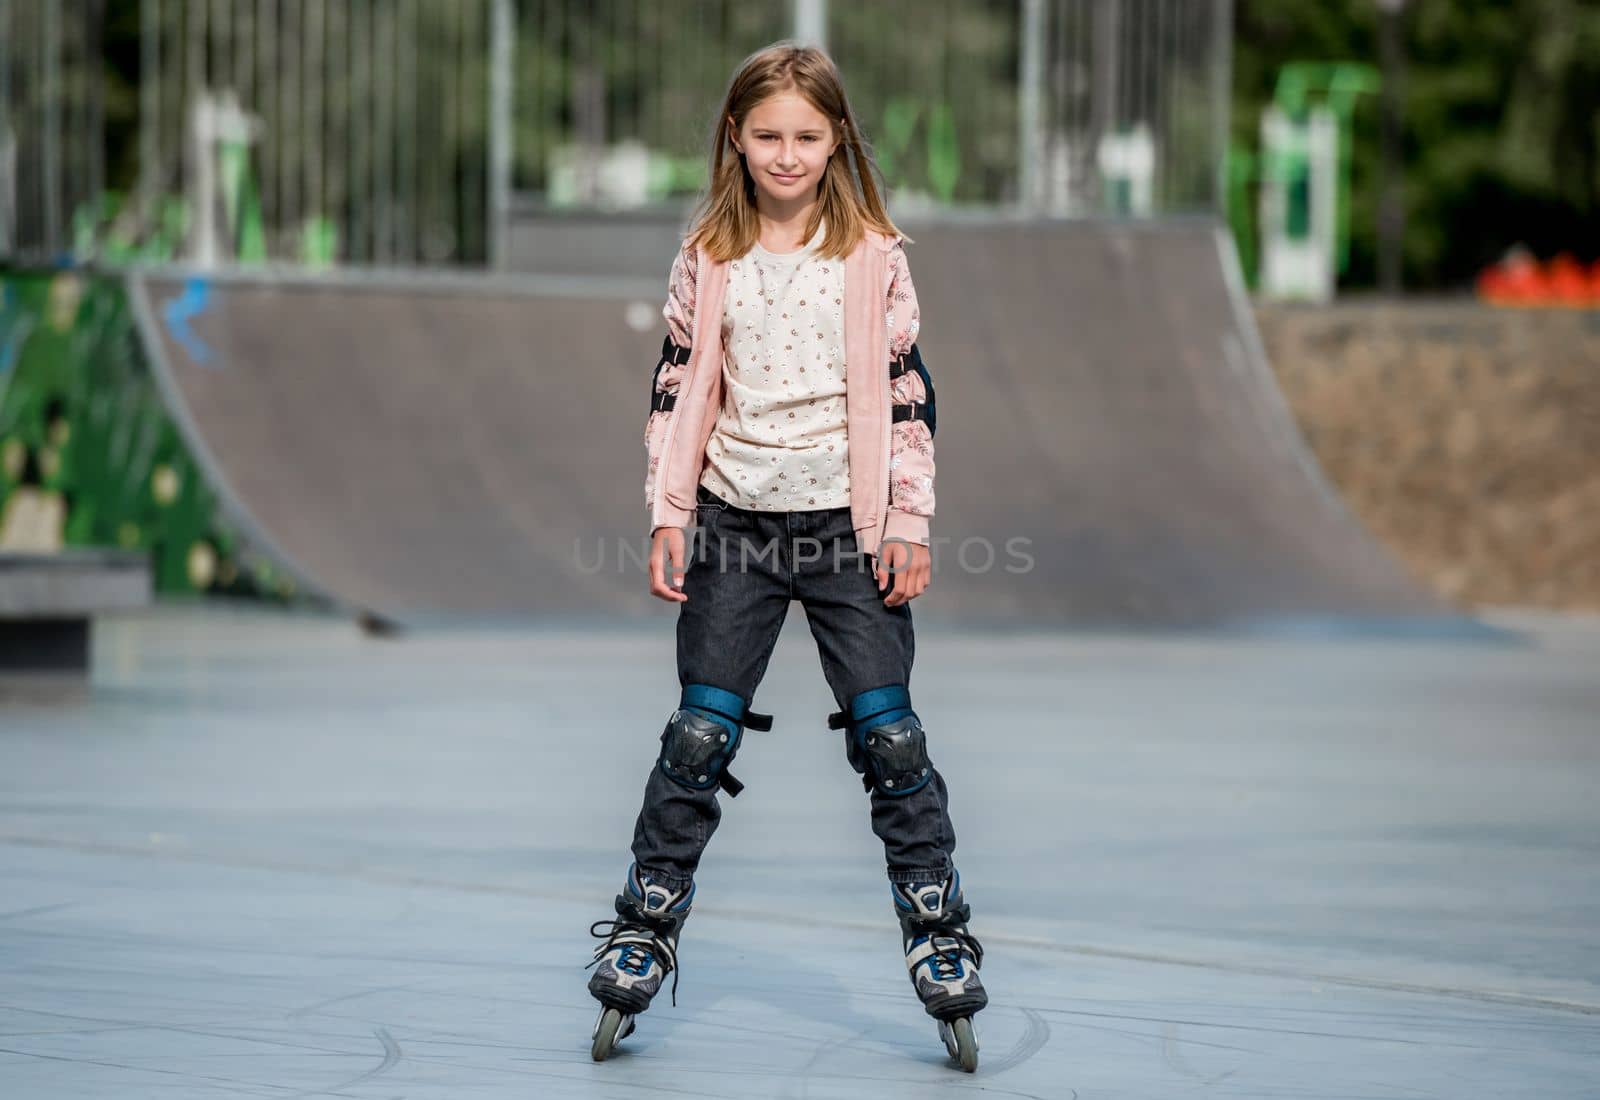 Cute girl roller skater riding in city park. Pretty female preteen child kid rollerskating with sunlight outdoors